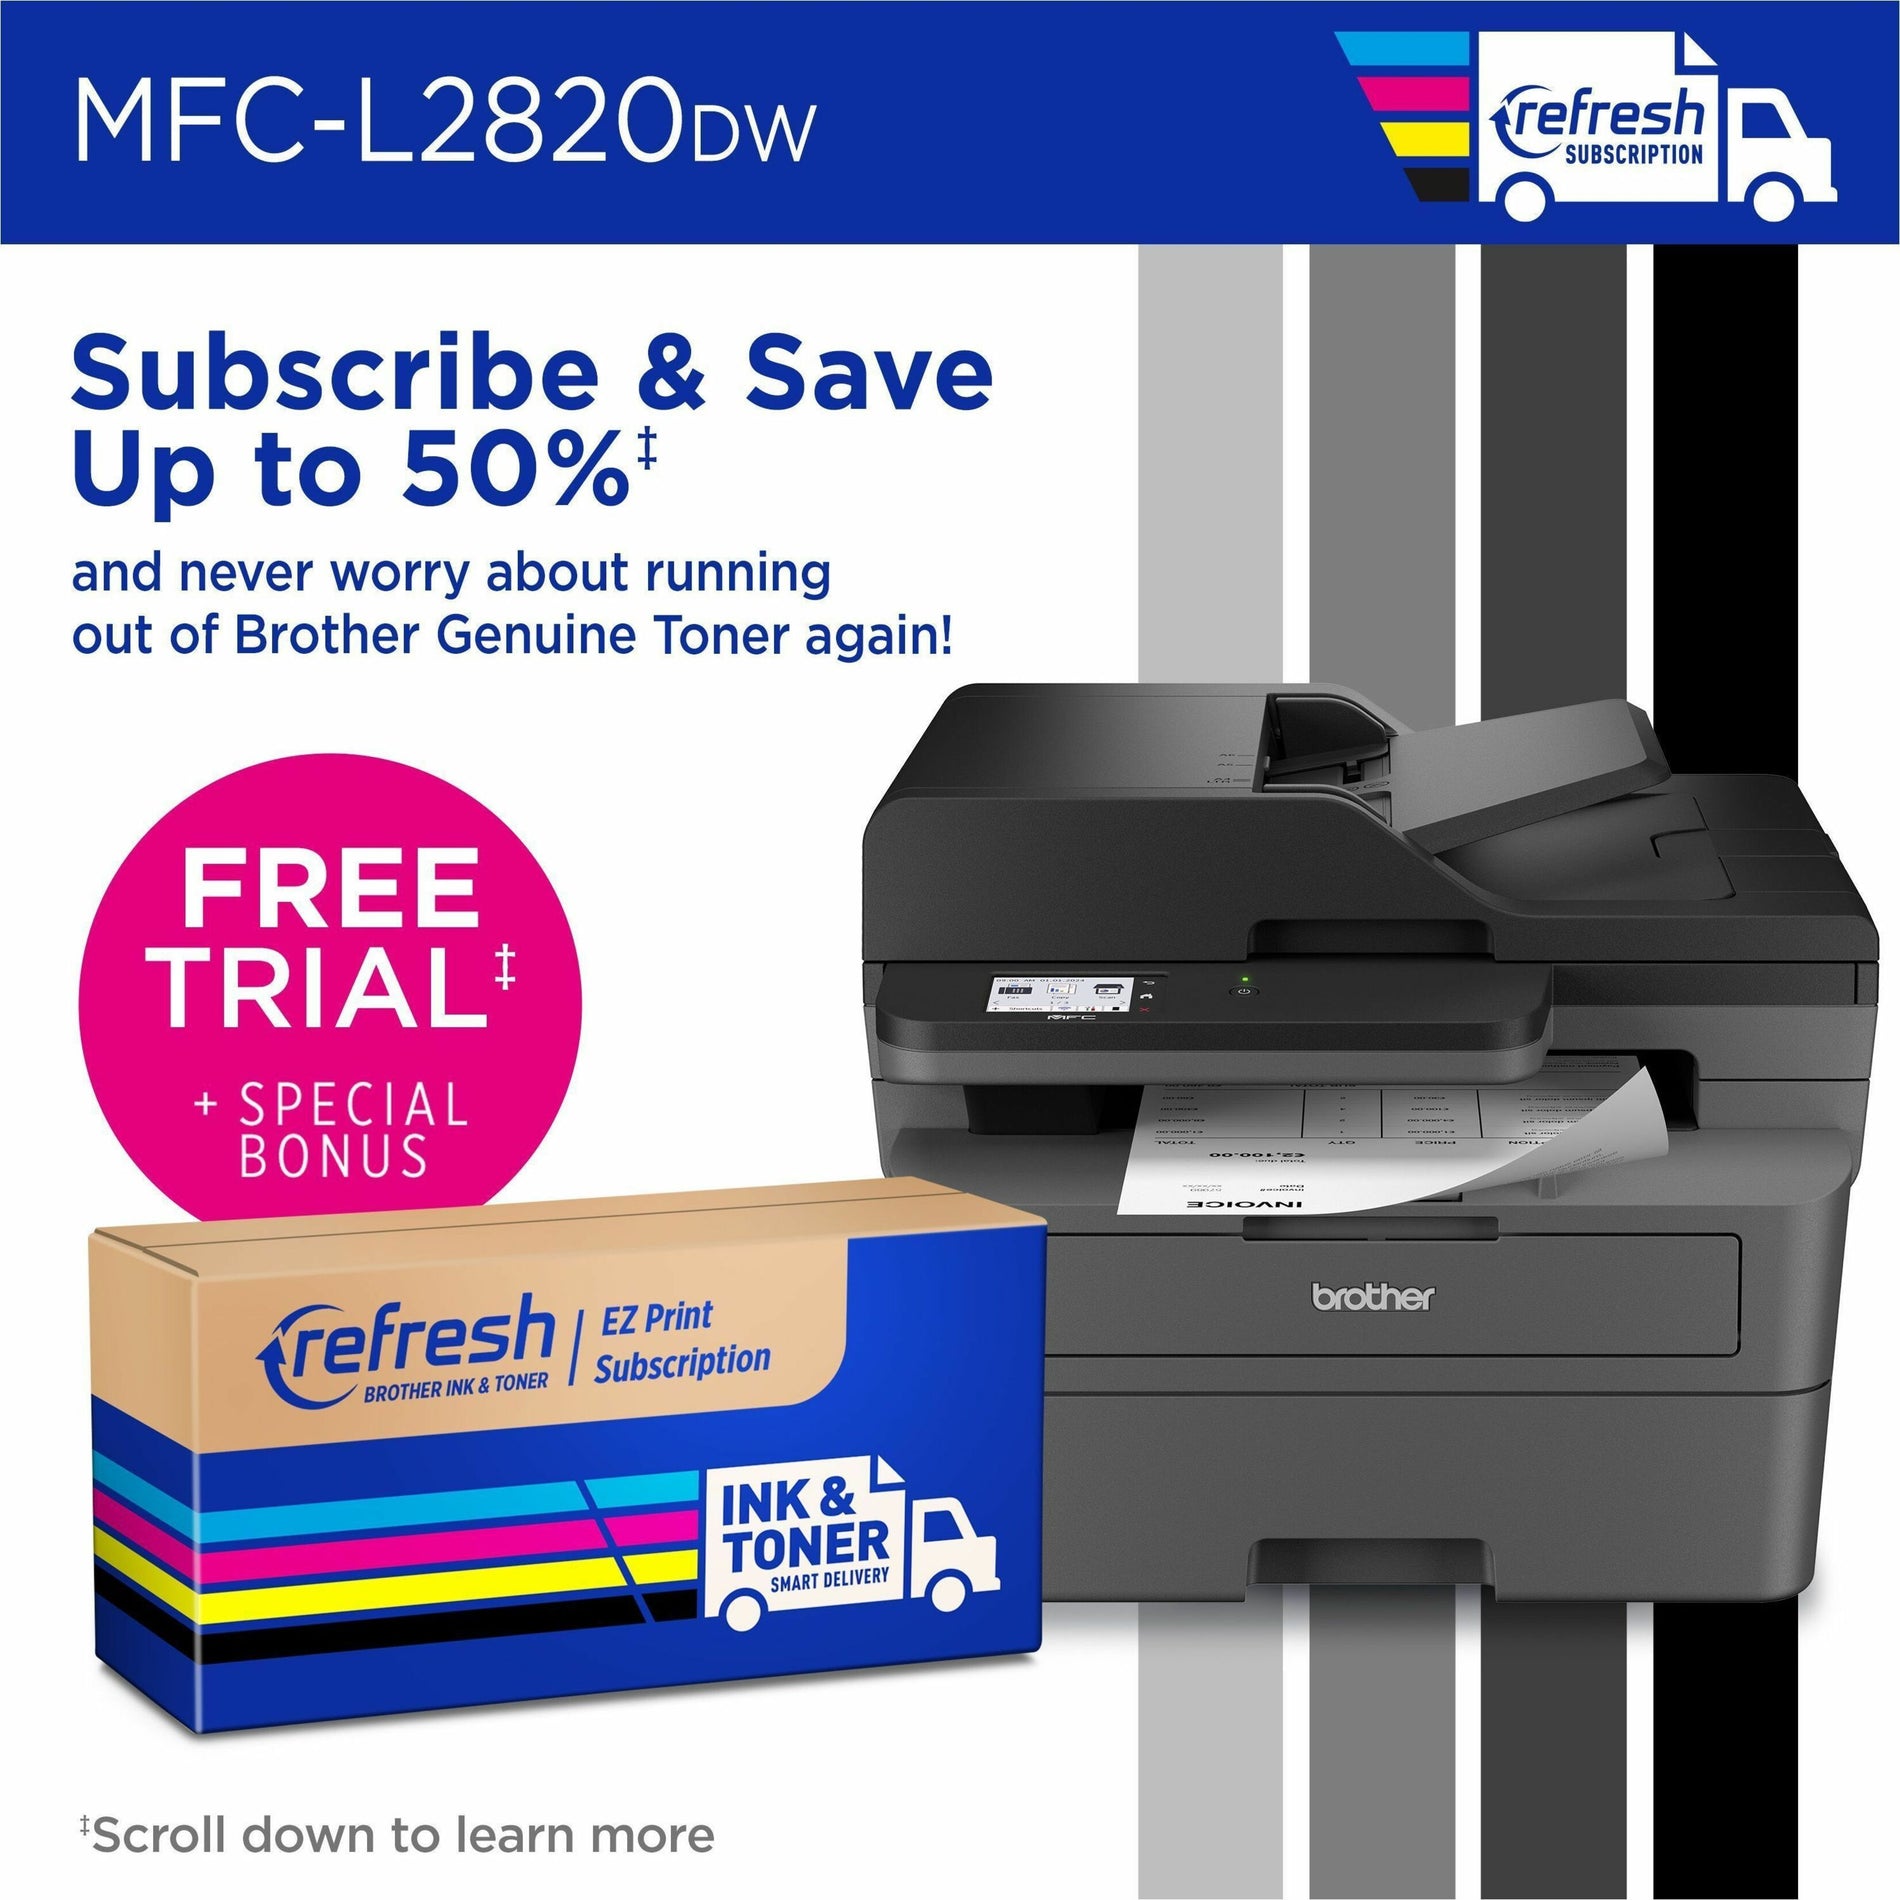 Brother MFCL2820DW All-in-One Laser Printer, Wireless, Color, Gray